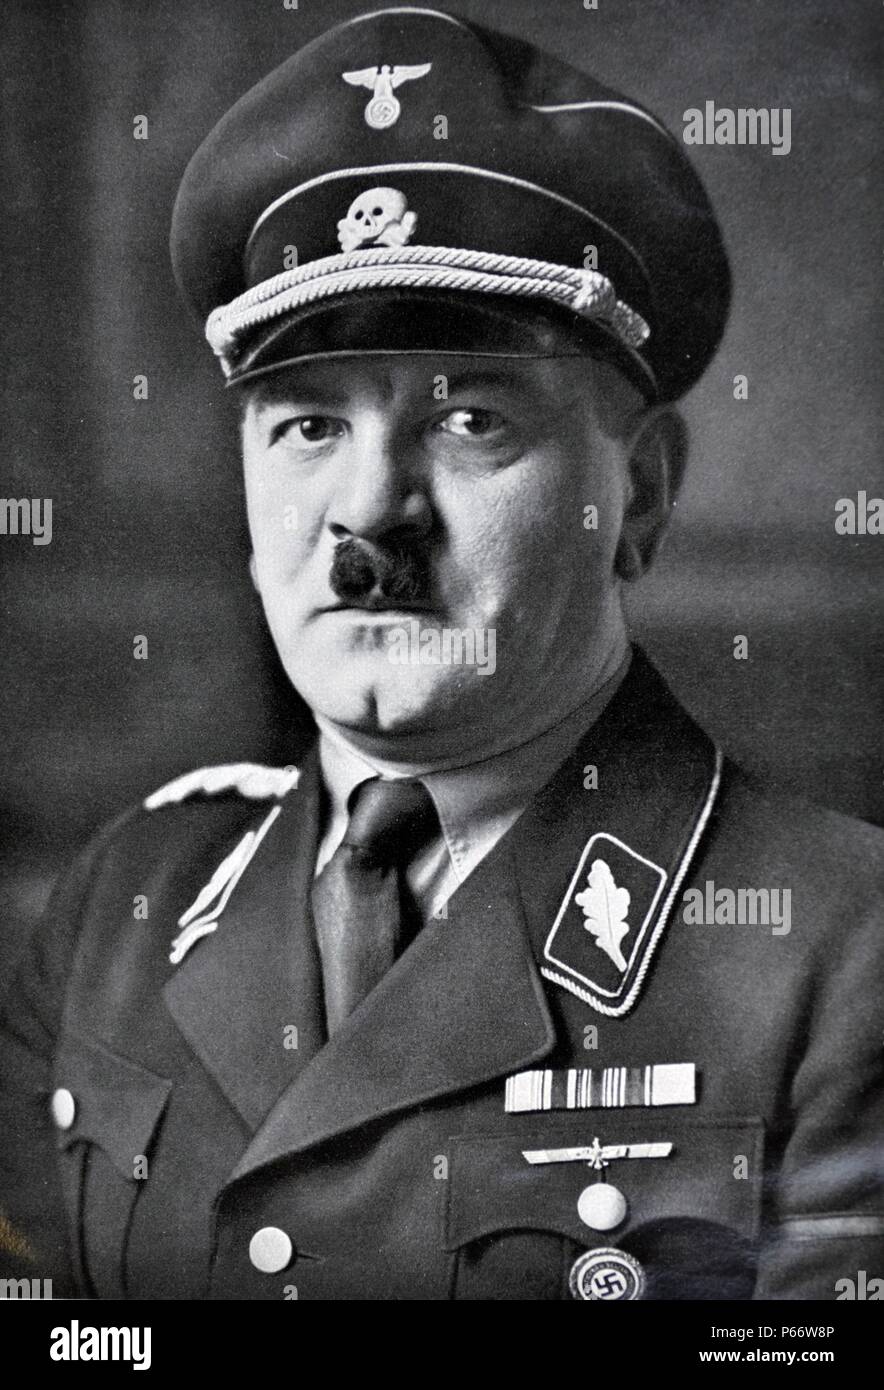 Julius Schreck (July 13, 1898 Munich – May 16, 1936) was an early Nazi Party member and also the first commander of the Schutzstaffel (SS). Stock Photo